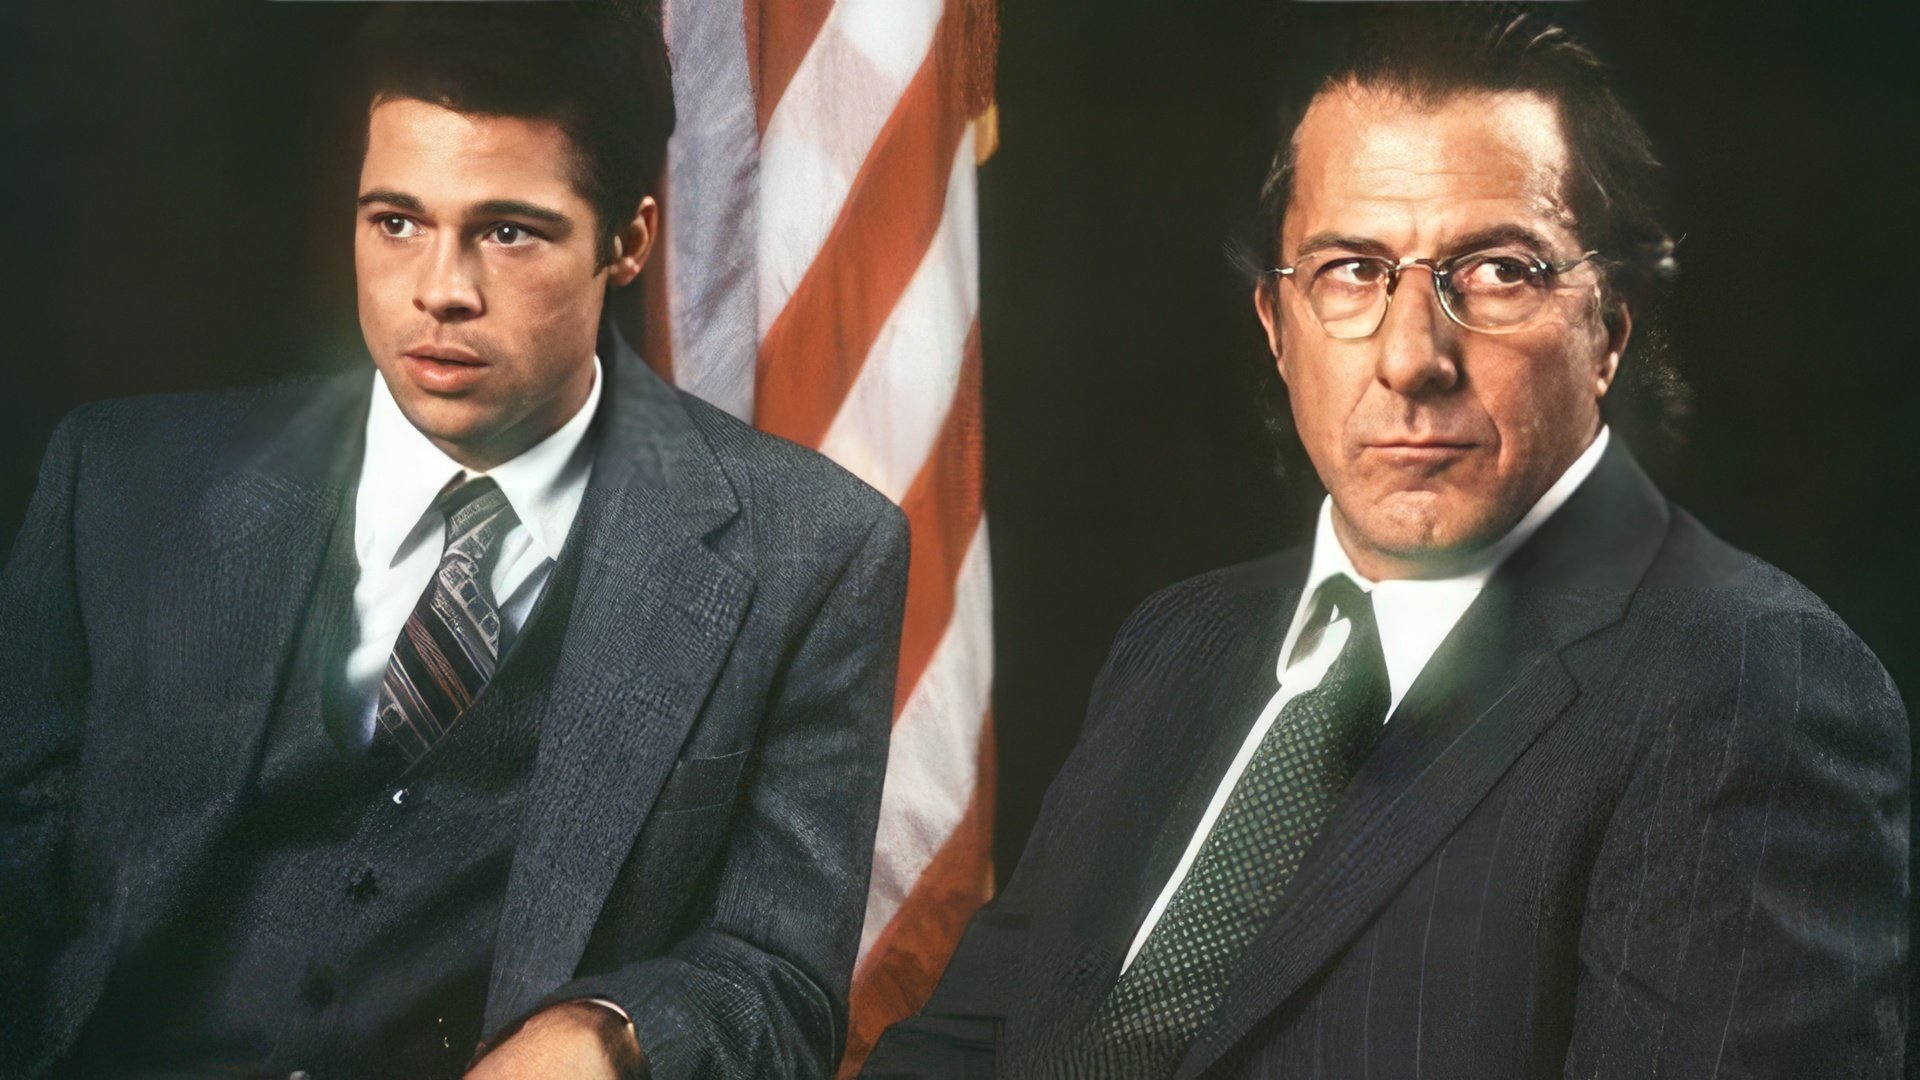 Dustin Hoffman and Brad Pitt in the Sleepers